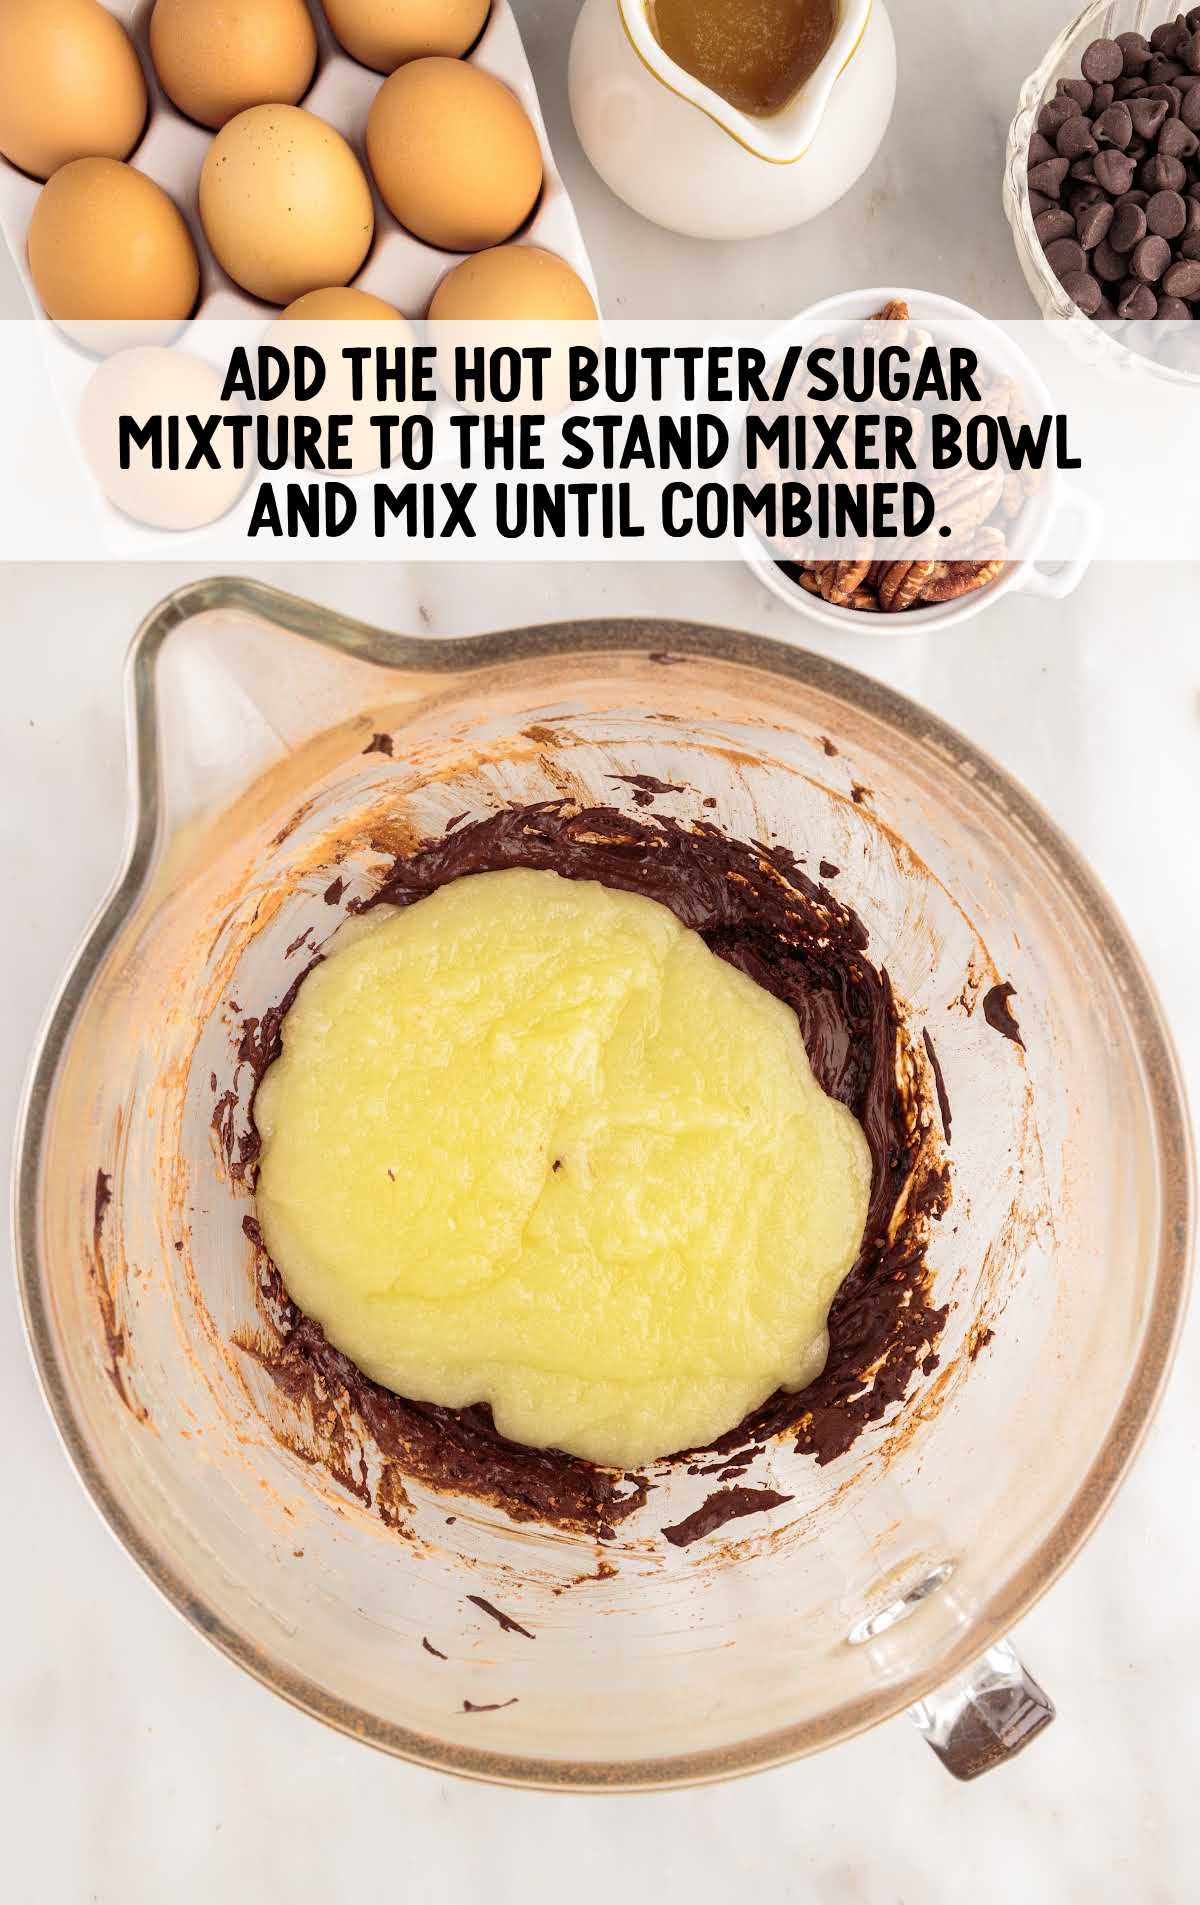 hot butter/sugar mixture added to the stand mixer bowl